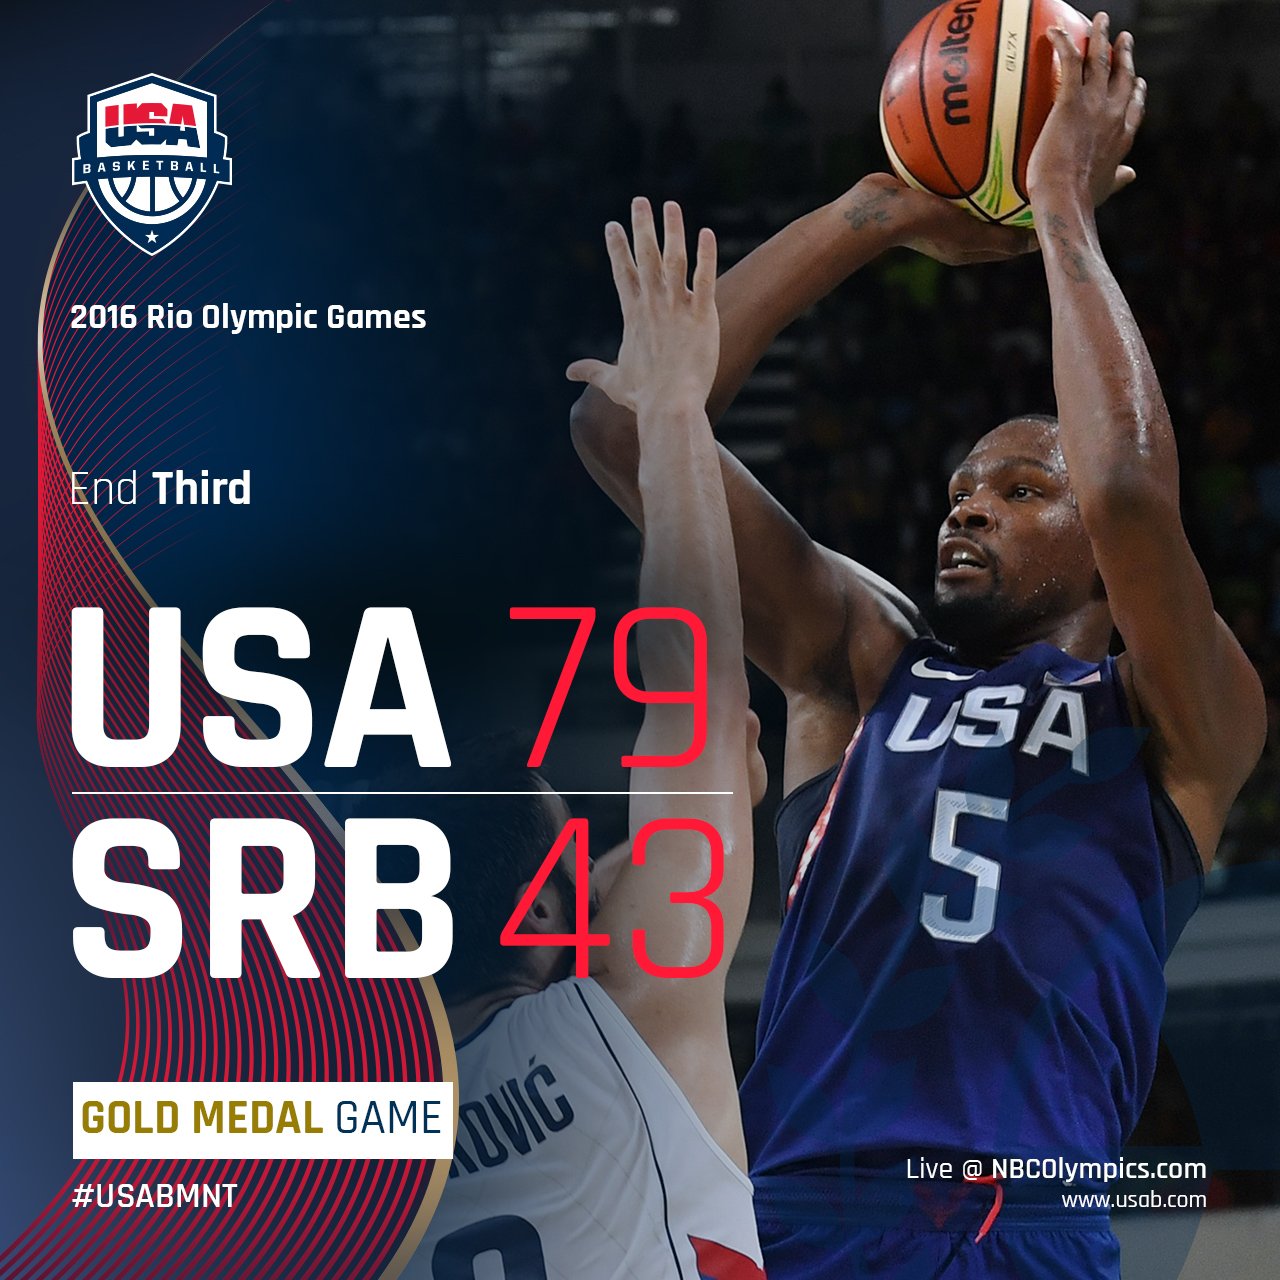 Usa Basketball End 3 Usa 79 Srb 43 Usabmnt One Quarter Away From Third Straight Olympic Gold Live T Co Pmgarl4yky T Co Bnx0uvbymr Twitter